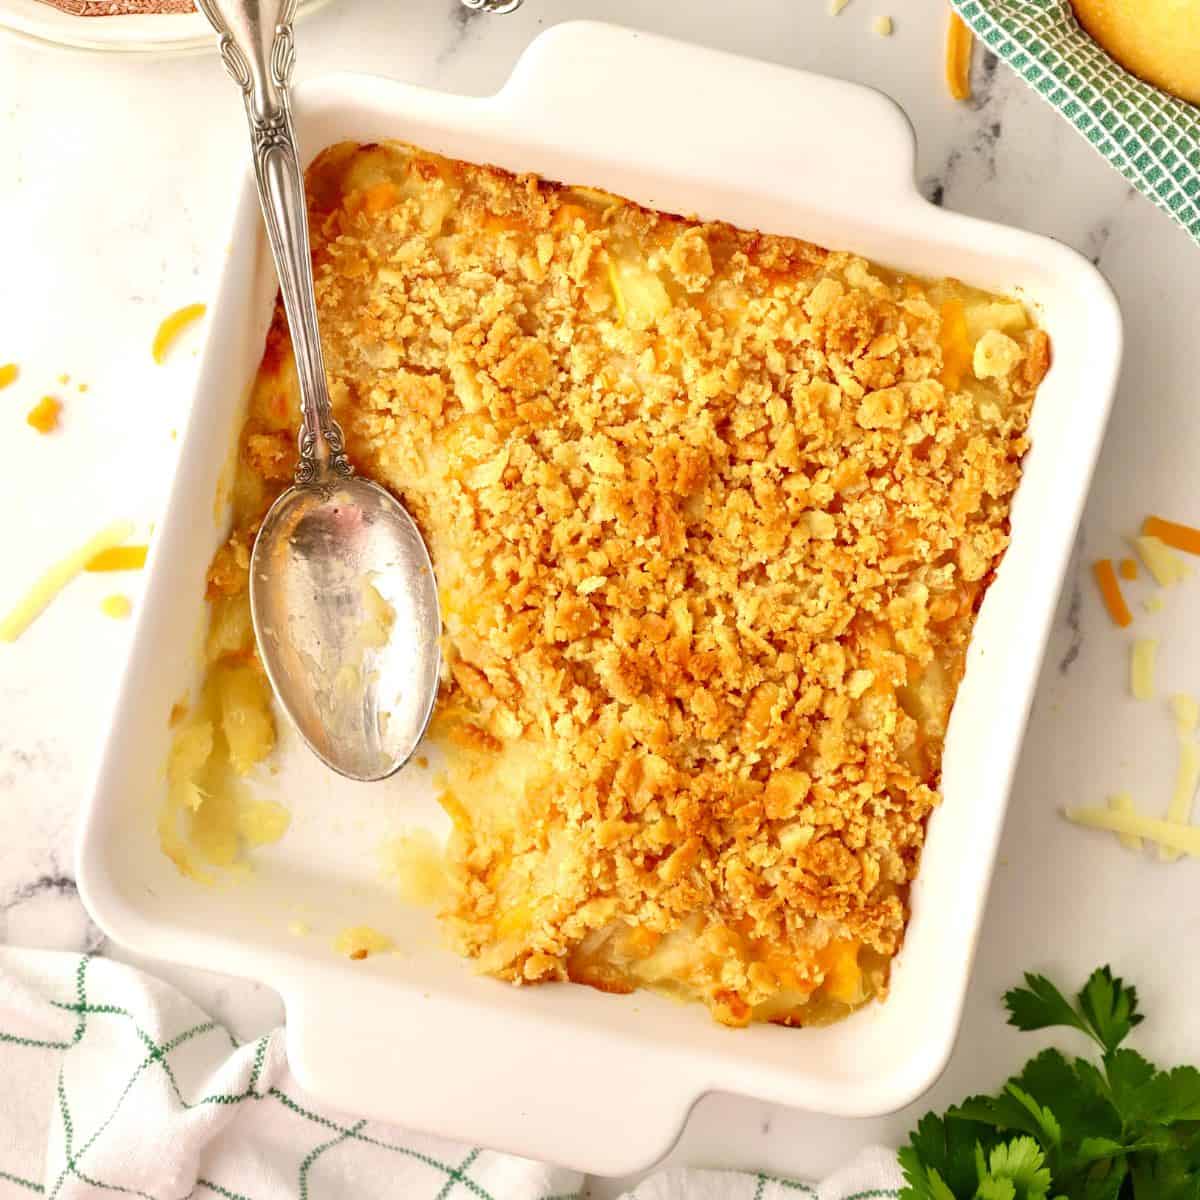 Pineapple cheese casserole topped with crushed Ritz crackers in a white baking dish.